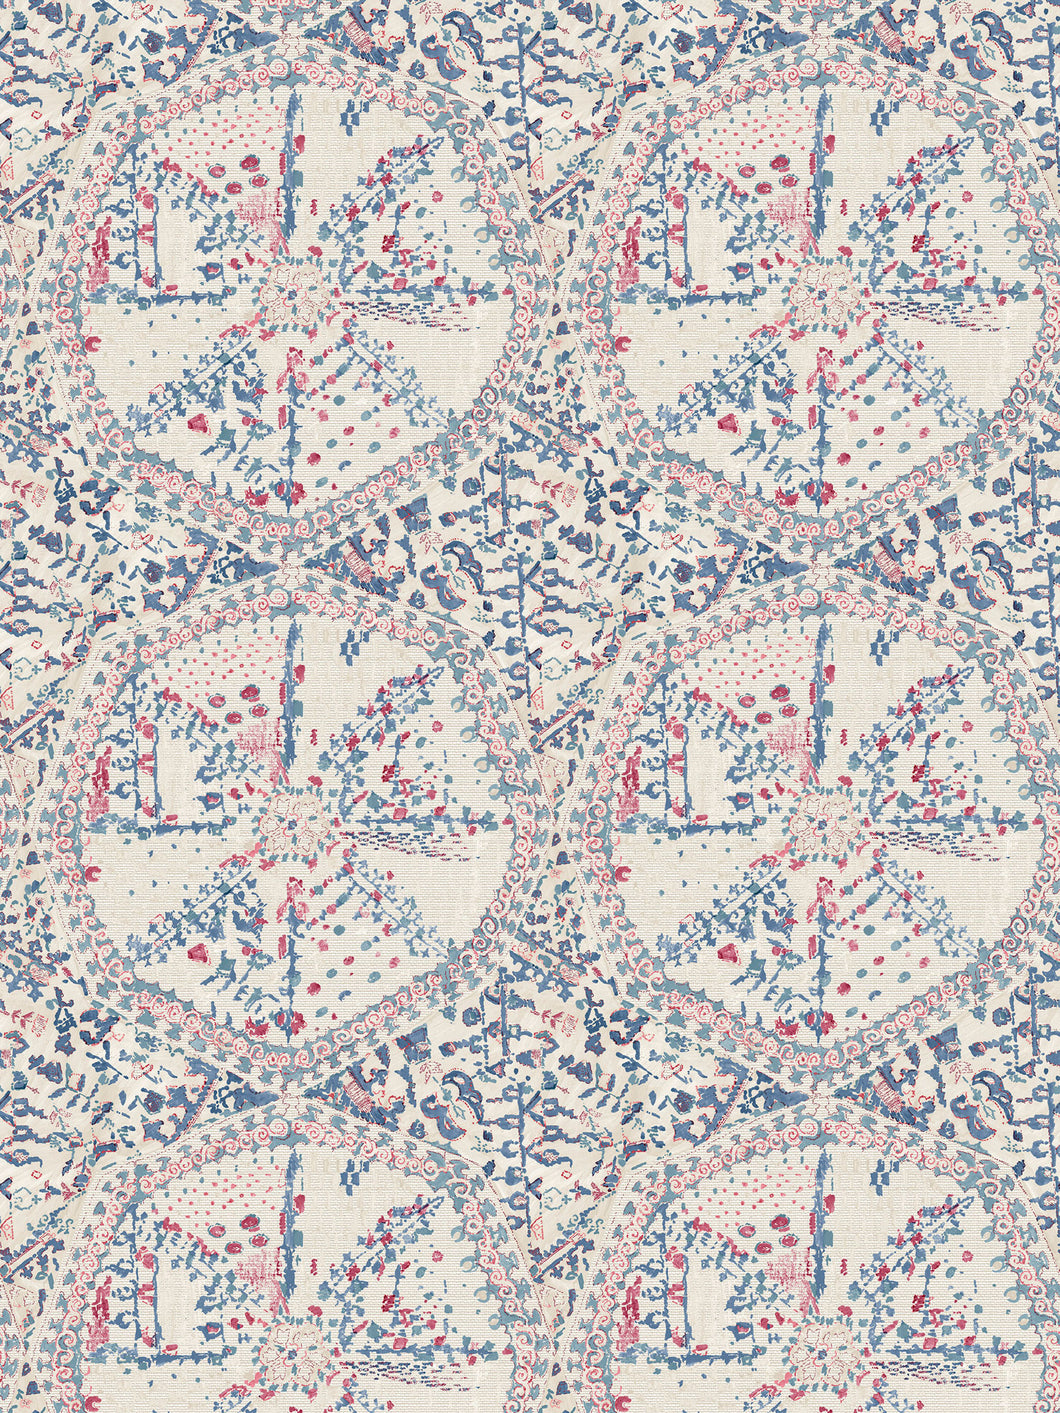 Dado Atelier blue and red suzette wallpaper